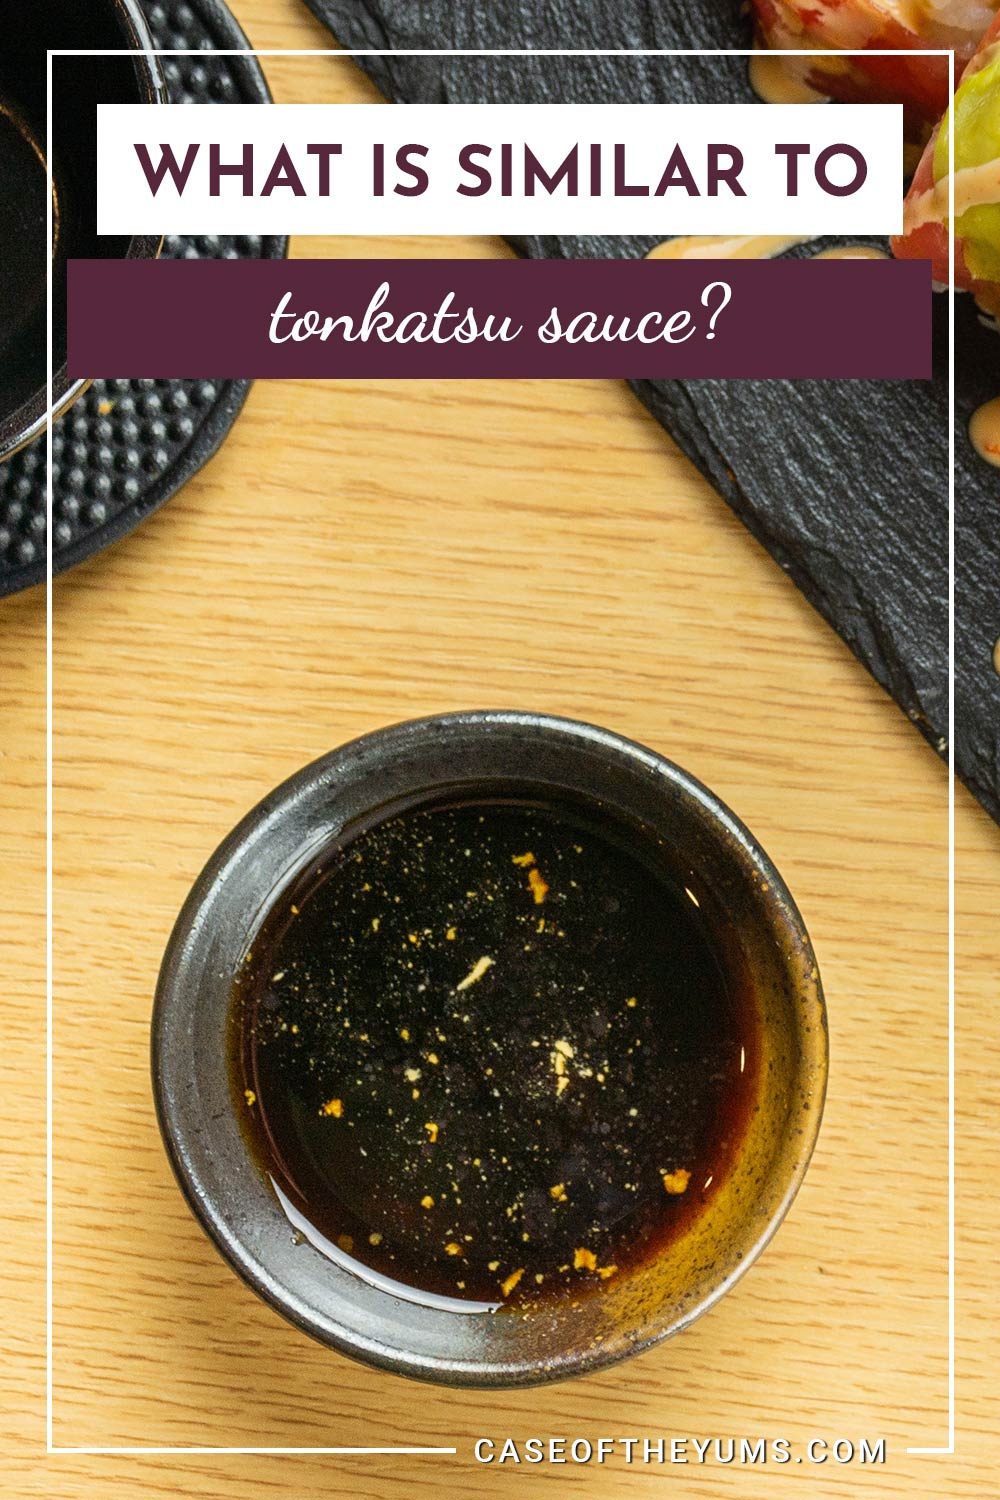 Sauce in a bowl - What is similar to tonkatsu sauce?